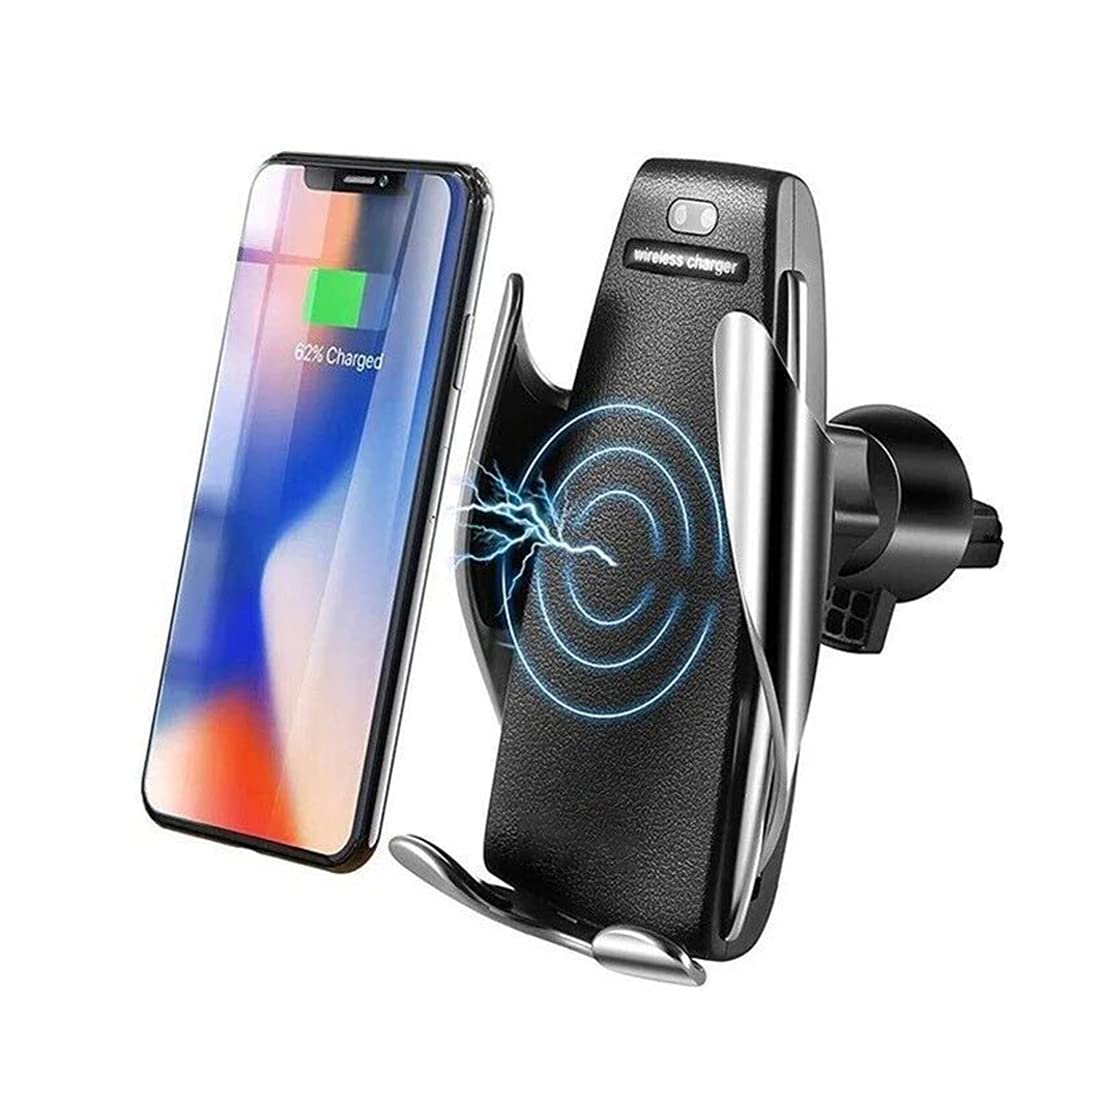 Hight Quality Wireless Car Charger Infrared Smart Sensor Wireless Automatic Sensor Car Phone Holder and Charger 